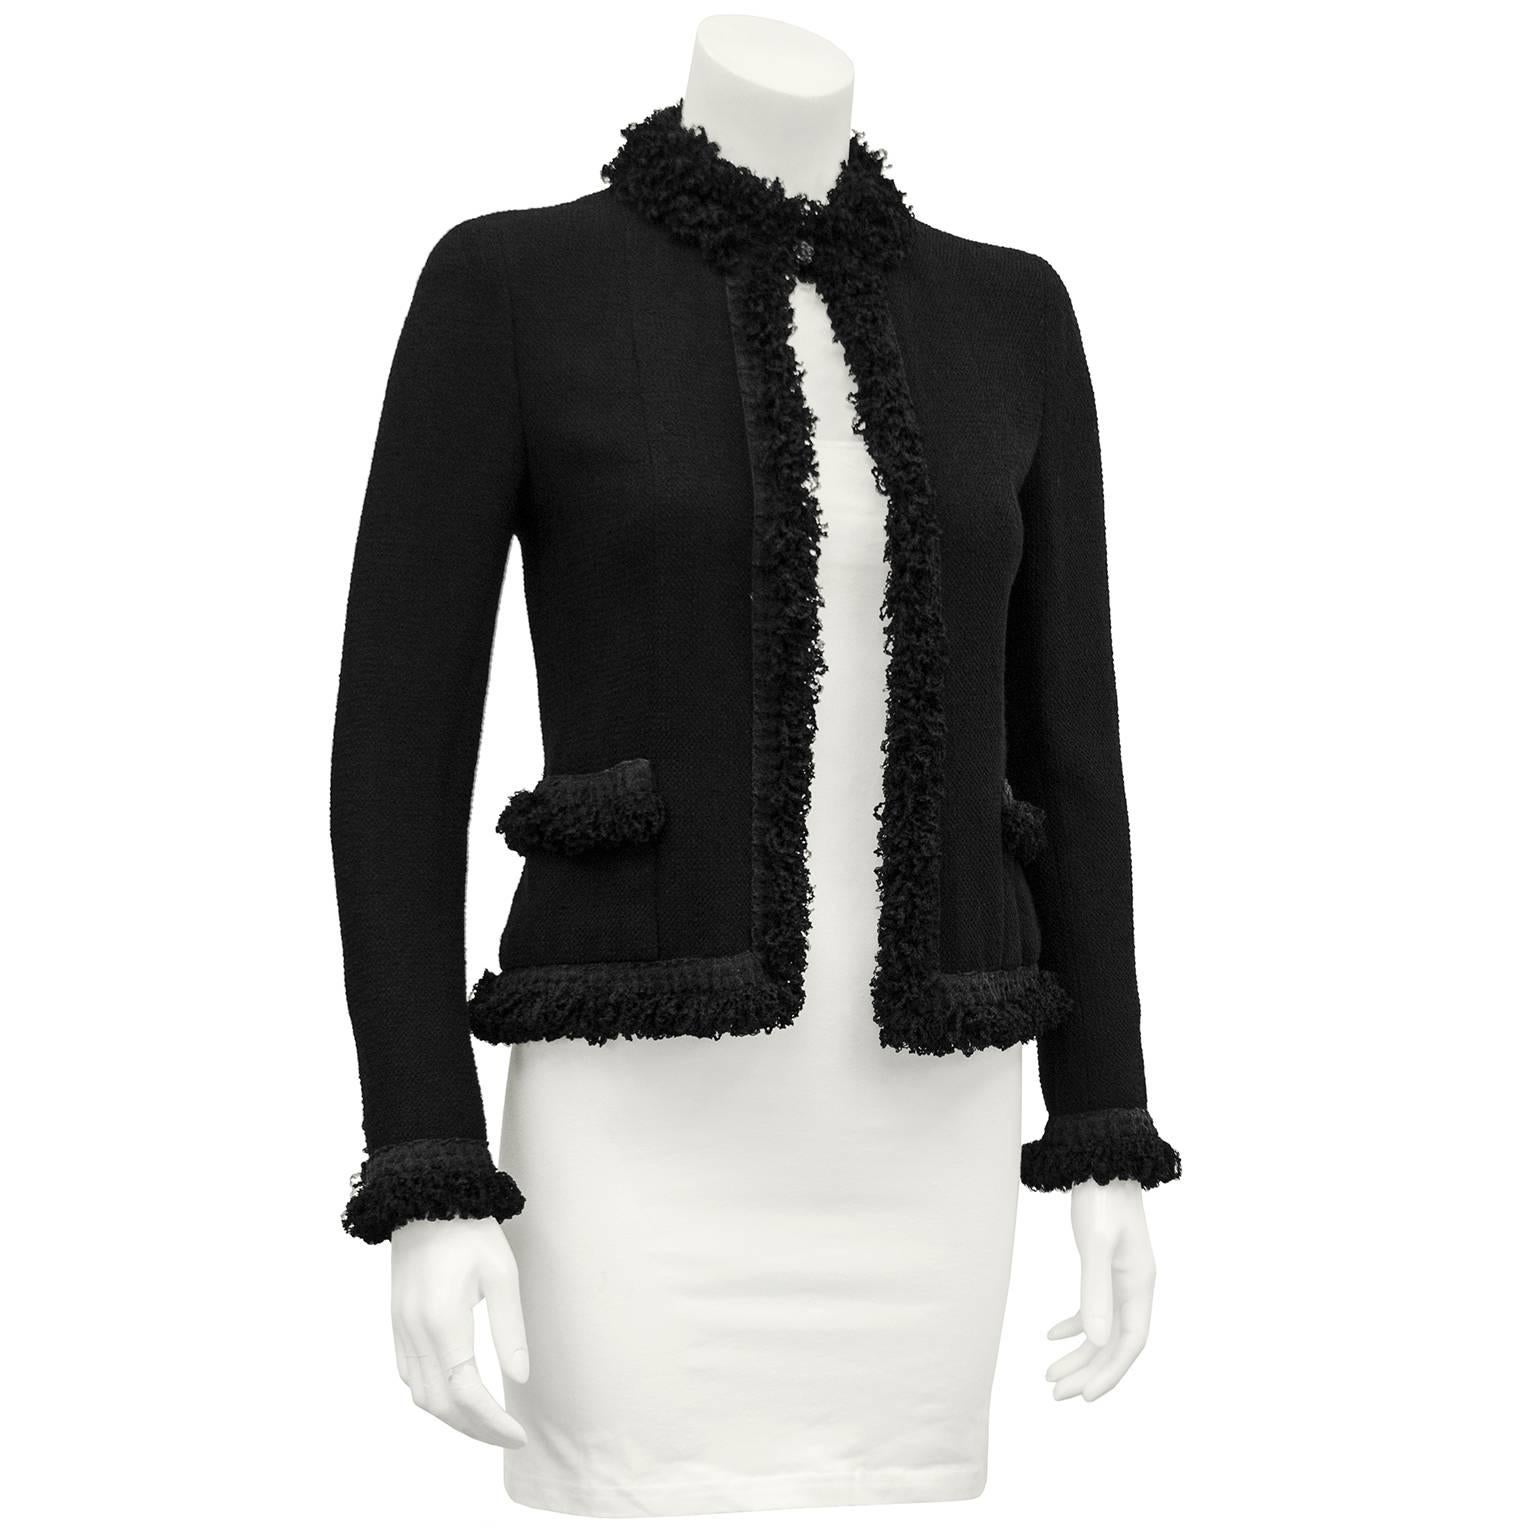 2003 Cruise collection Chanel black cardigan. Black fine boucle with a fringe detail along the neck, down the front, on the hem and cuffs. Two front pockets with fringe detail and CC charm. Black Carnelia buttons at the cuffs and one at the at the